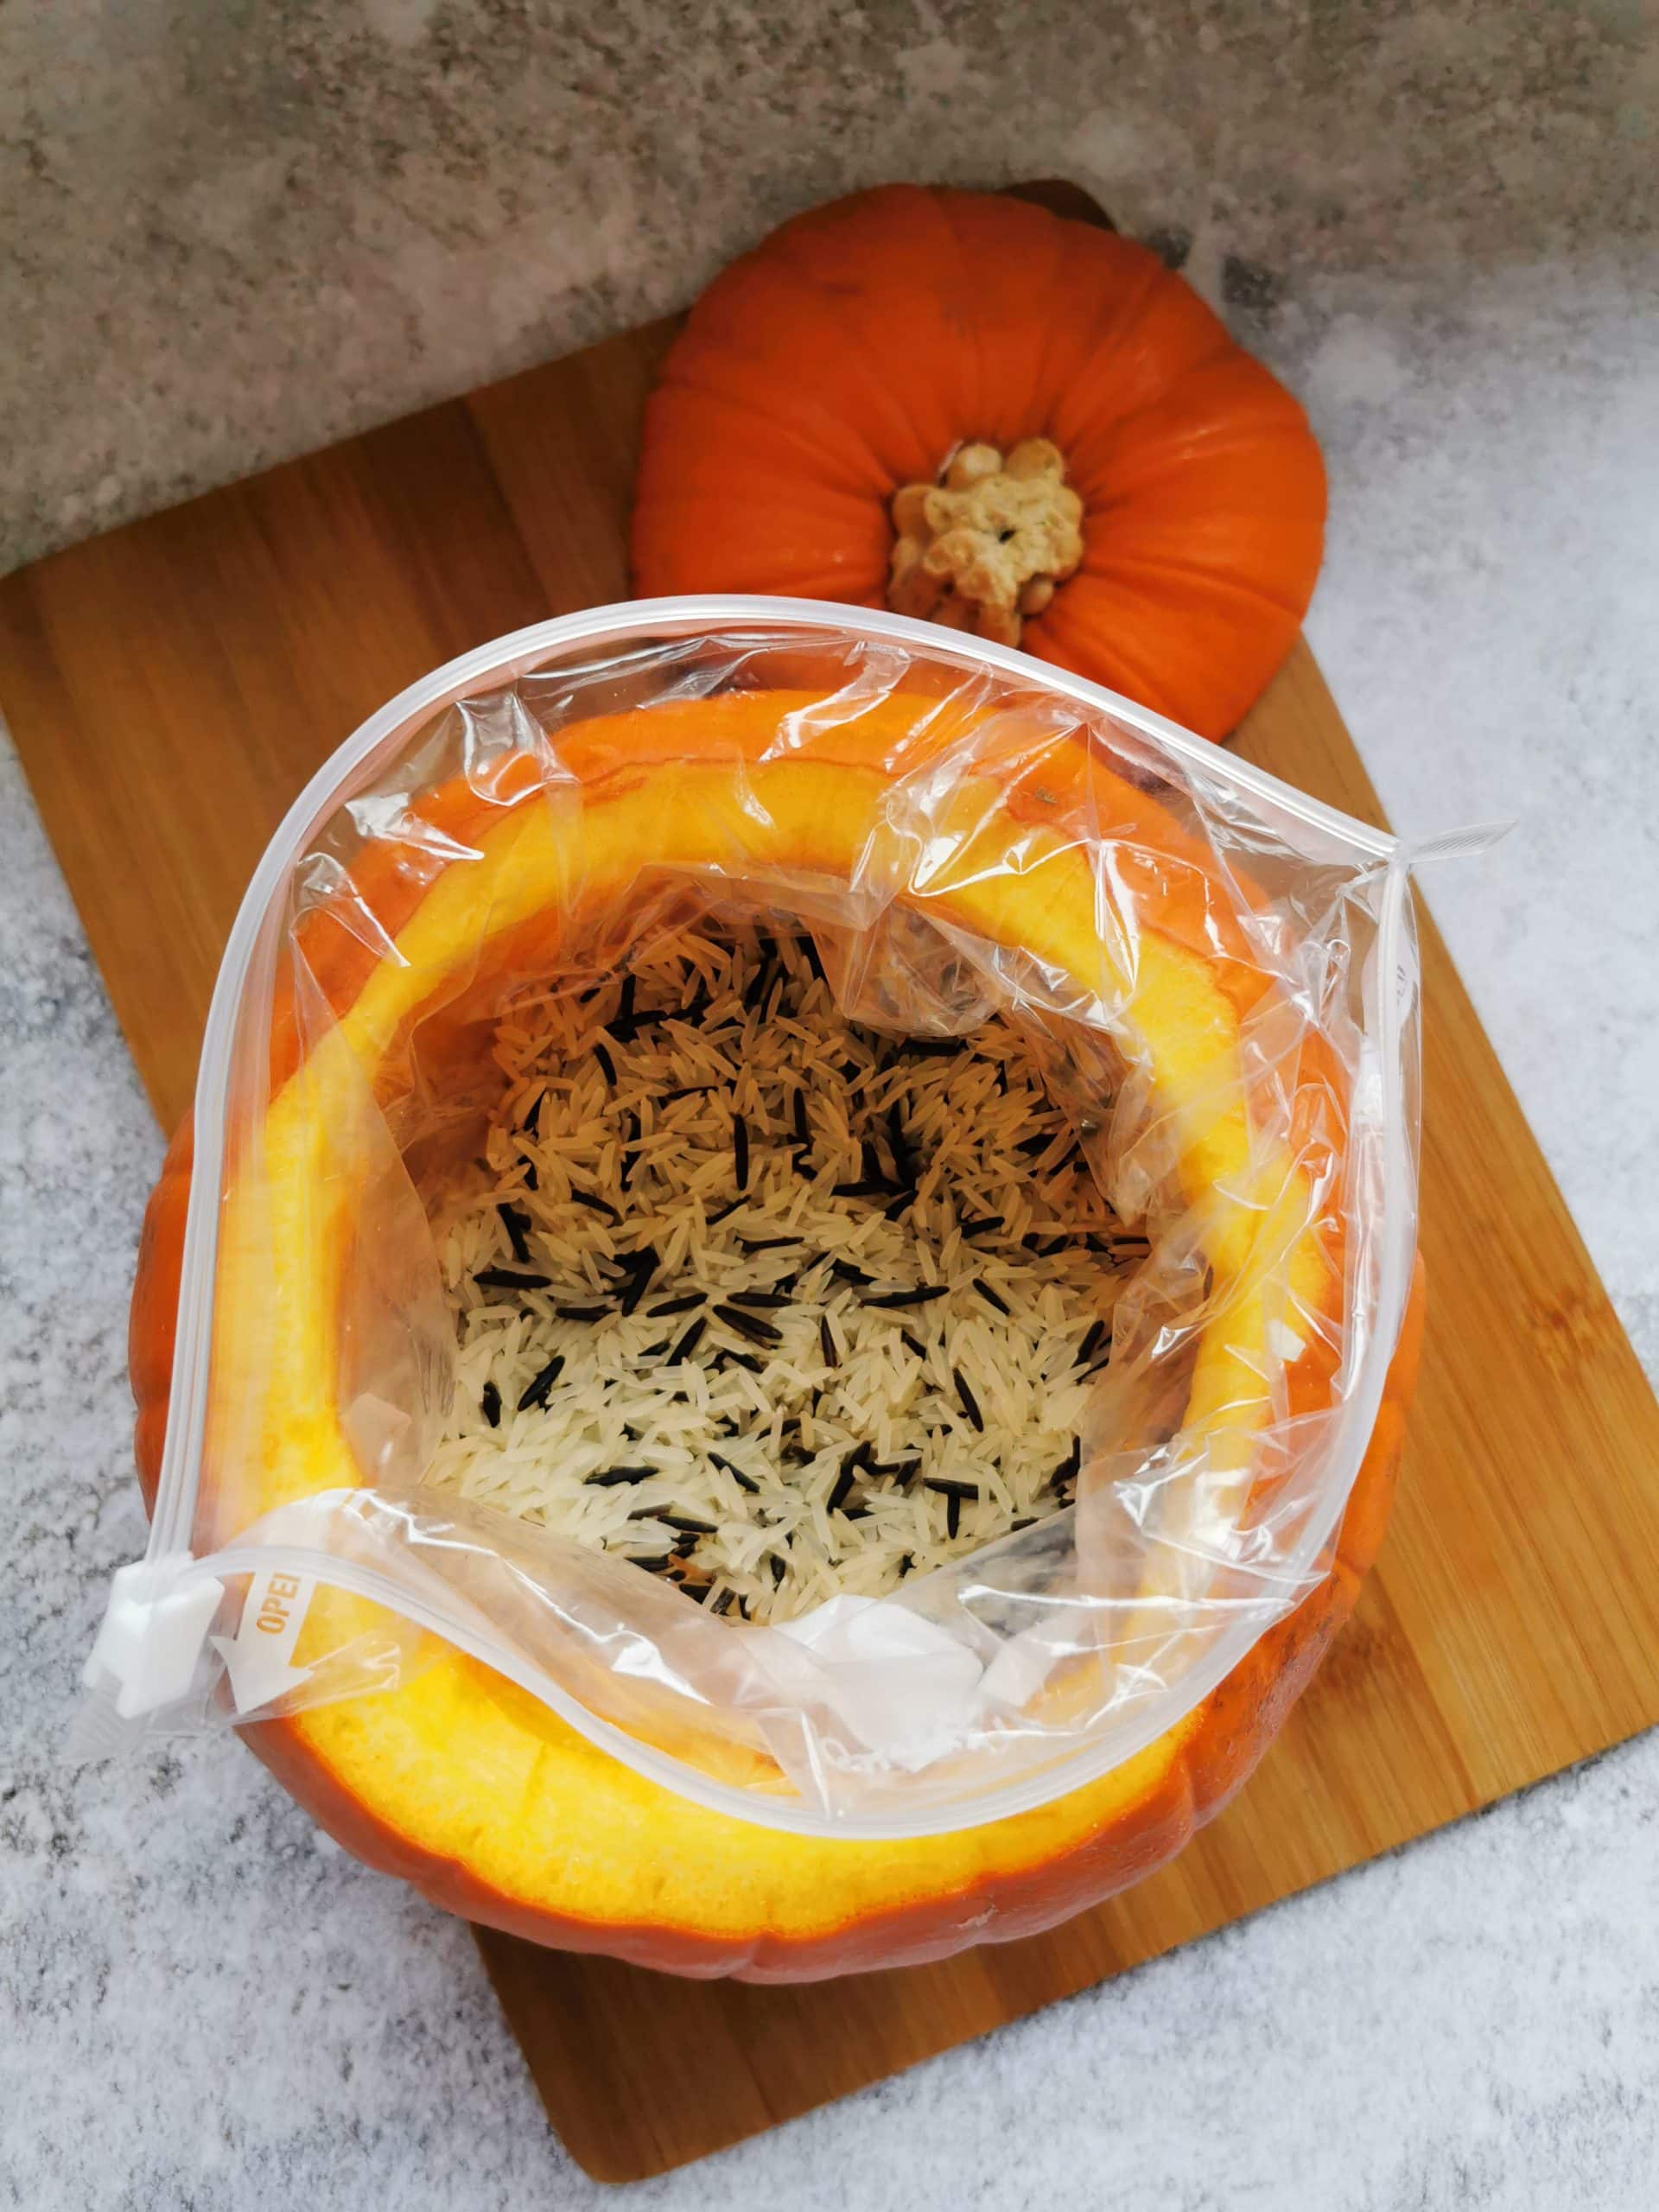 A pumpkin filled with rice in a plastic bag